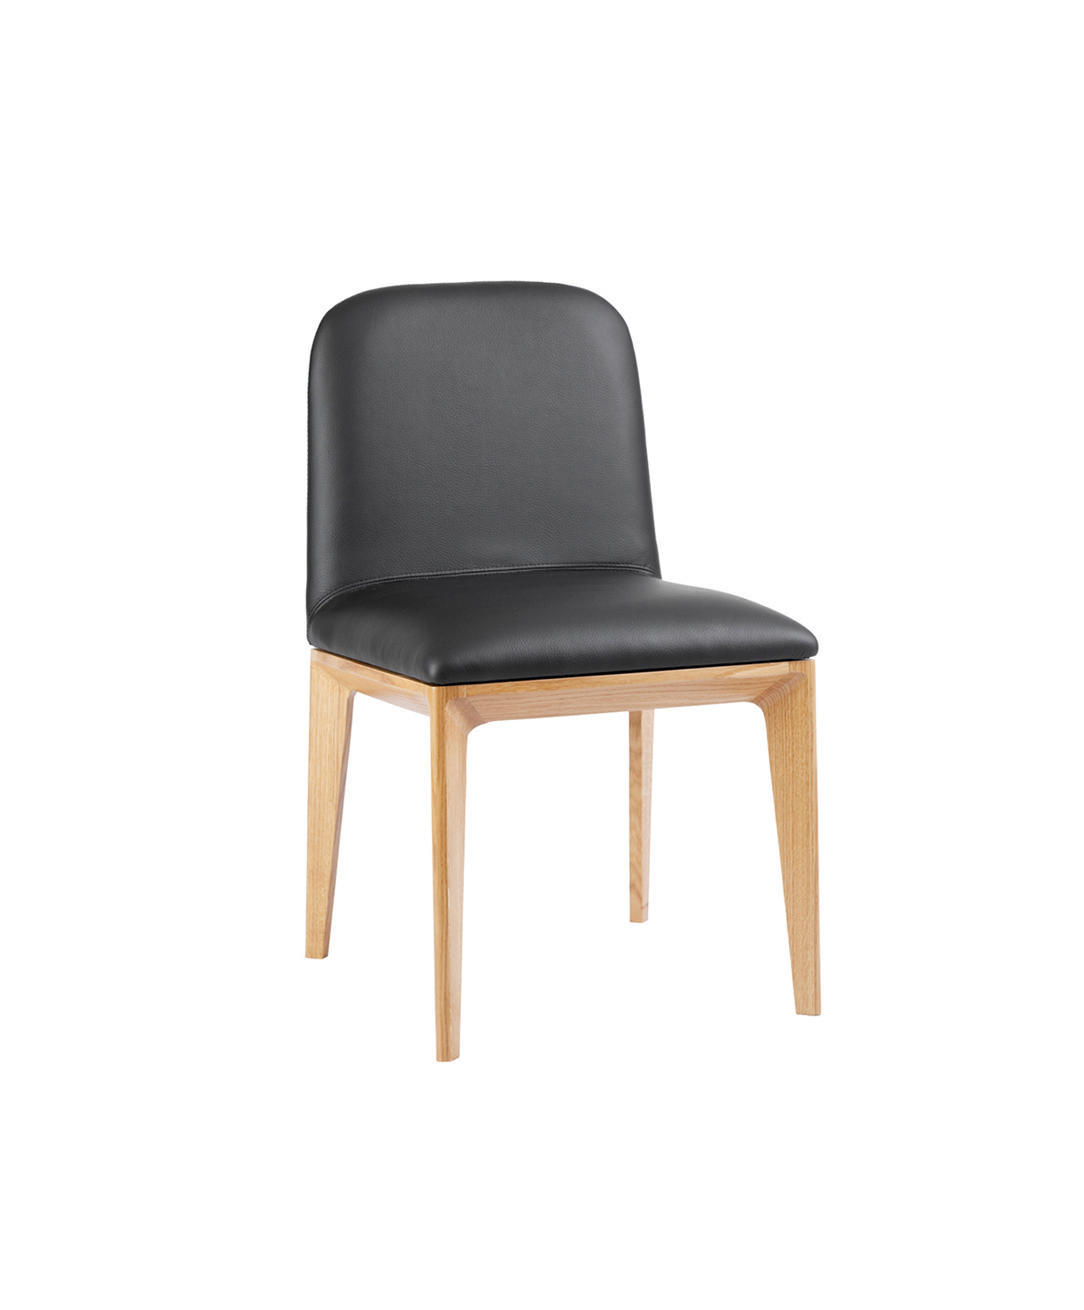 Best Restaurant Black Leather Dining Chairs / Comfortable Wooden Dining Chairs wholesale